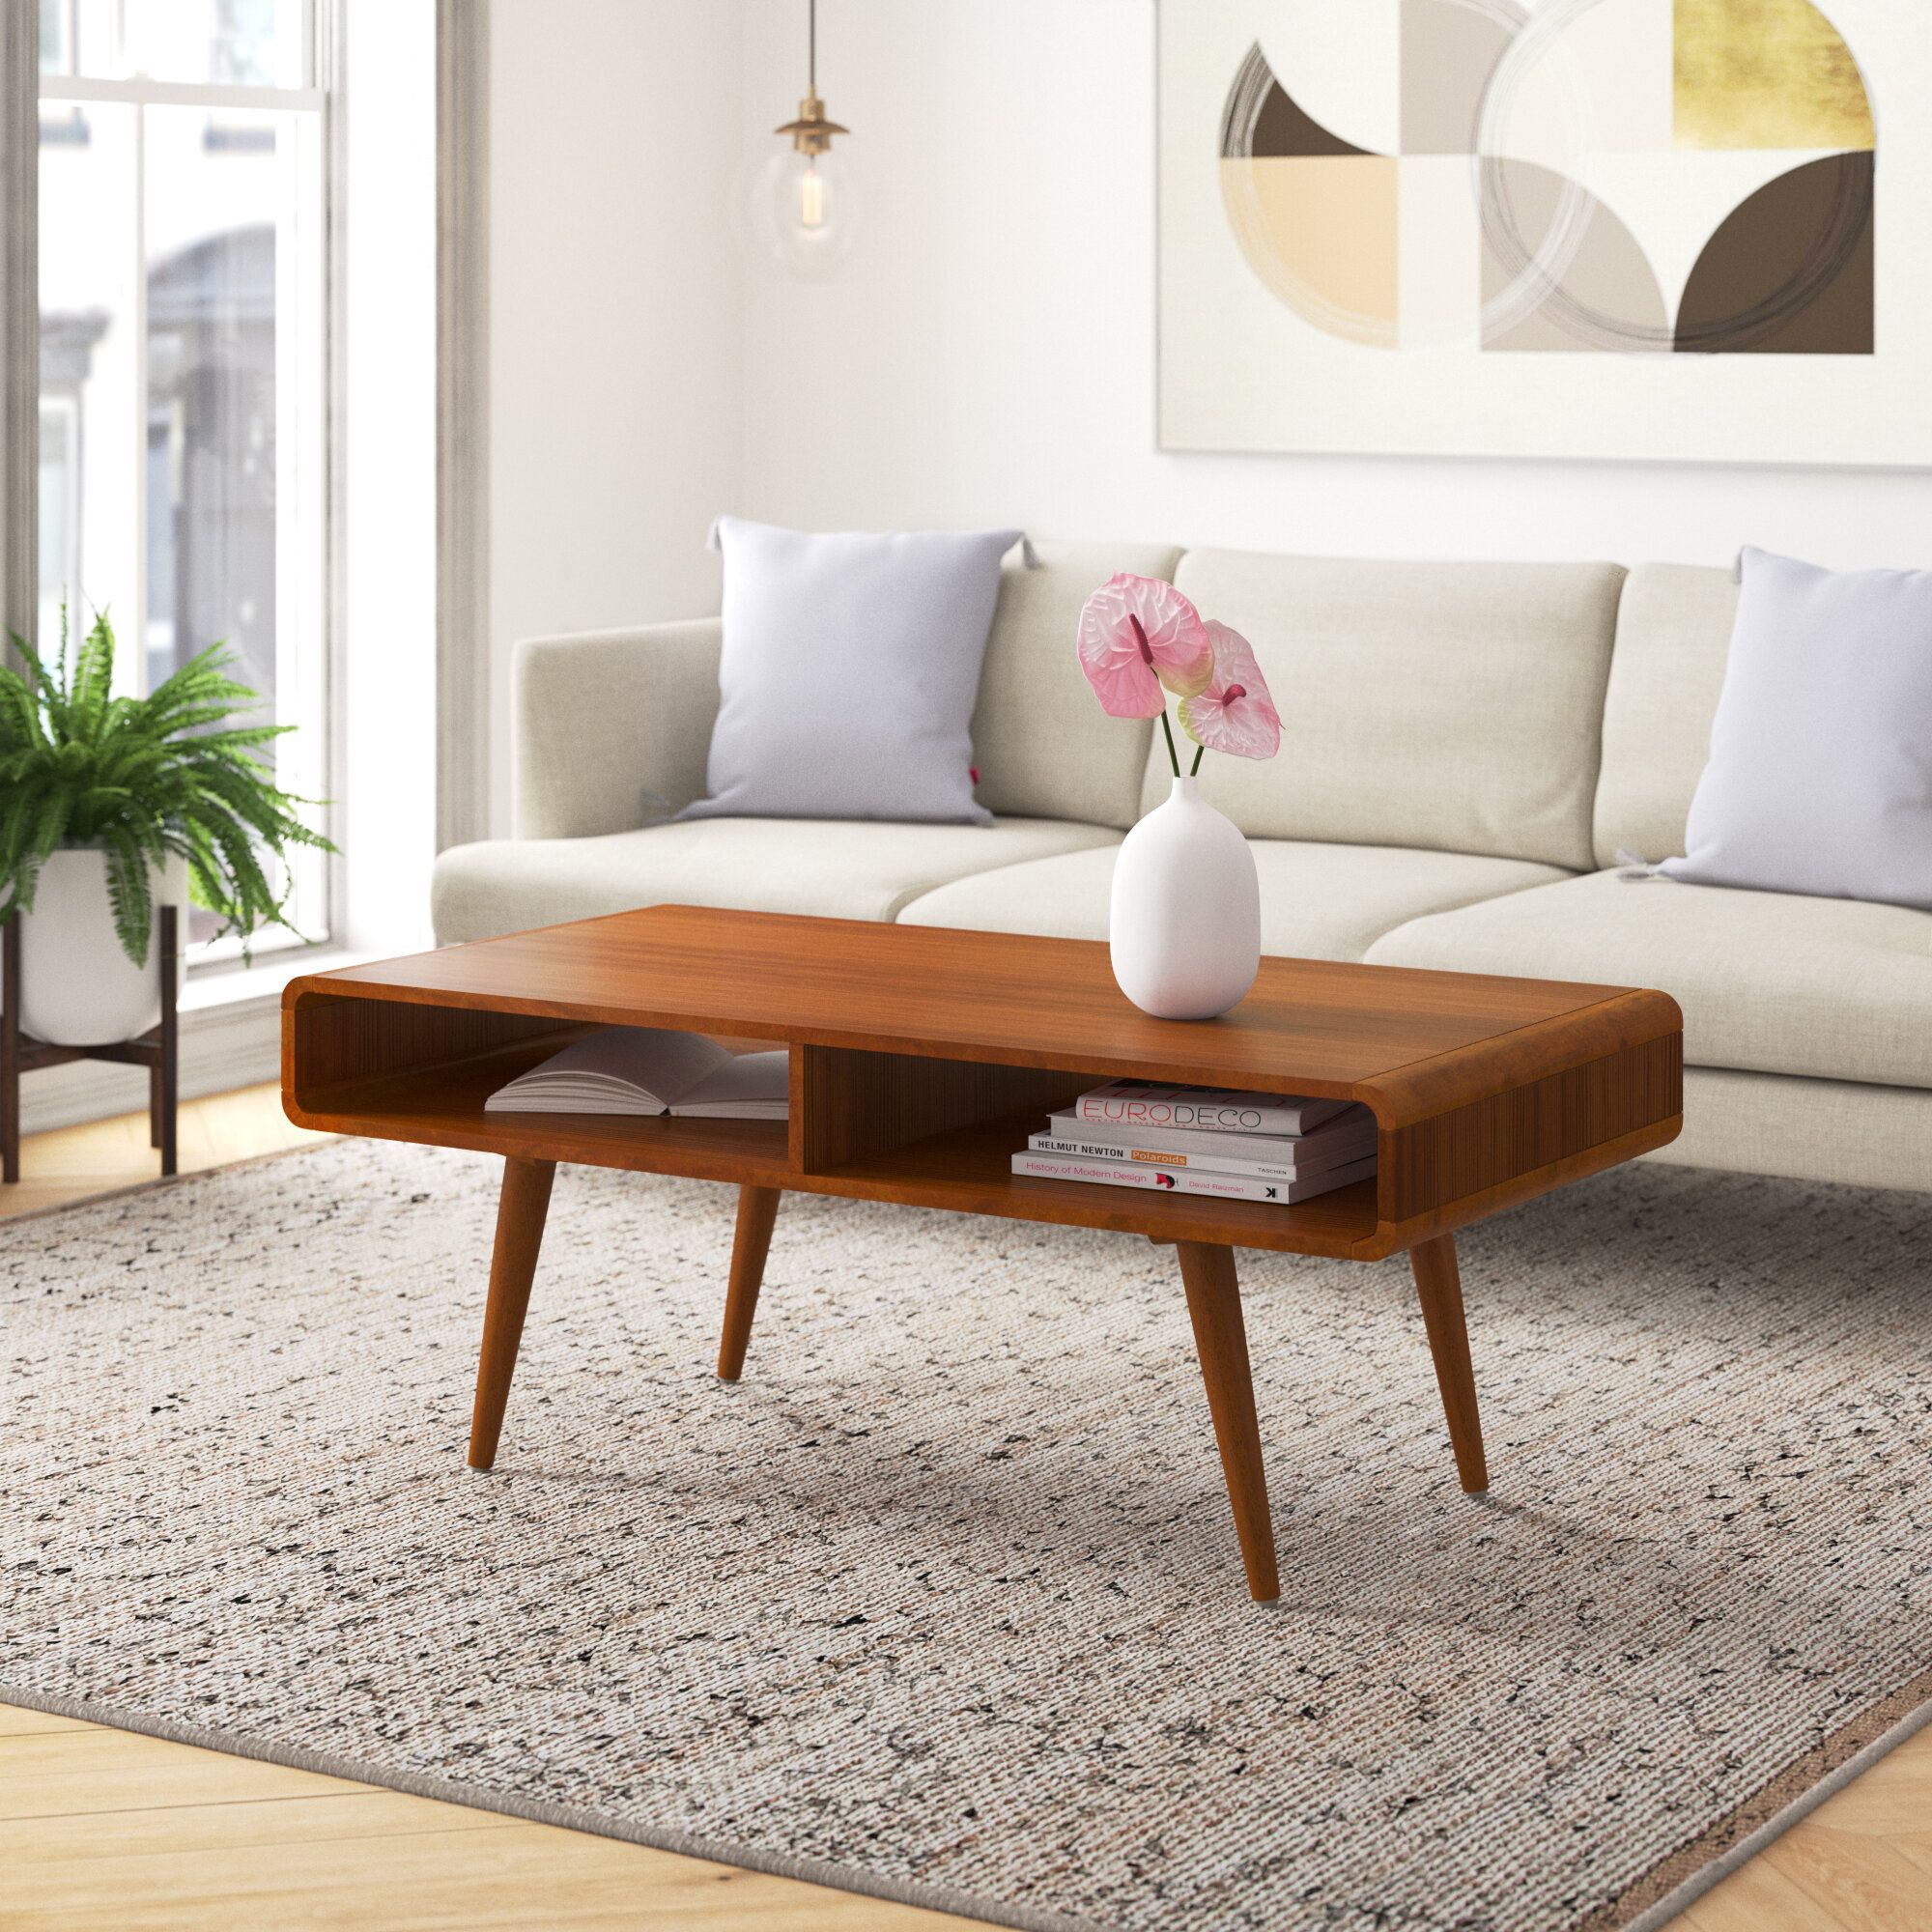 Mercury Row® Mccurley Coffee Table With Storage & Reviews | Wayfair Intended For Mid Century Coffee Tables (View 14 of 15)